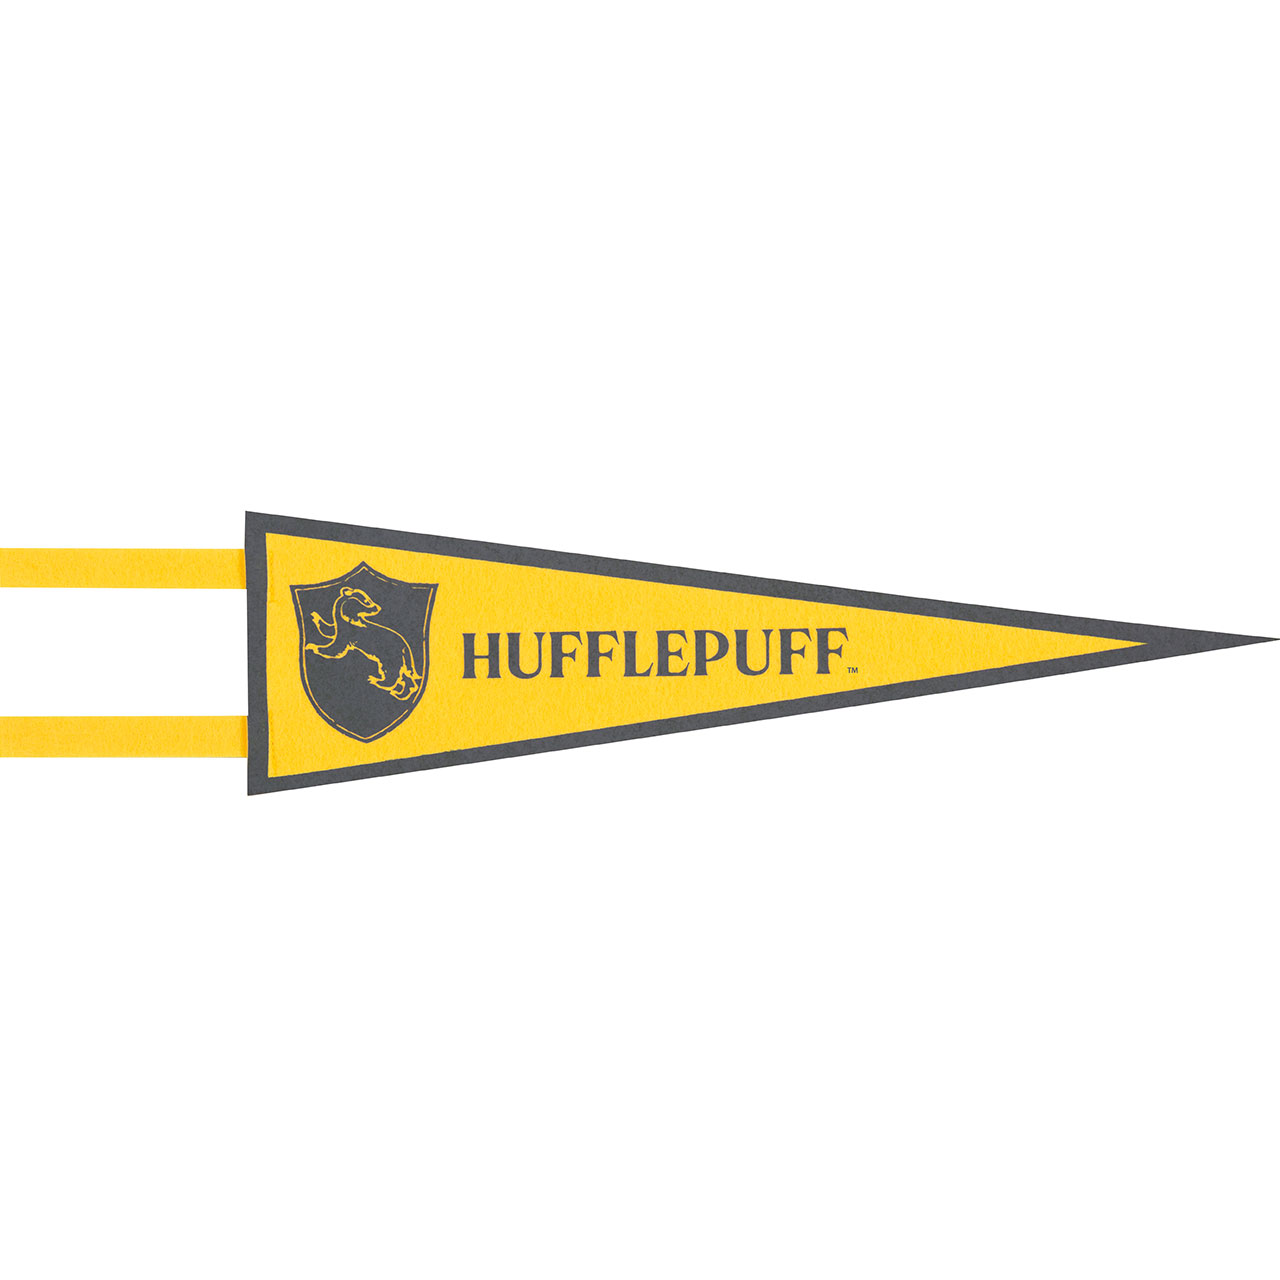 4 Harry Potter Party Pennants